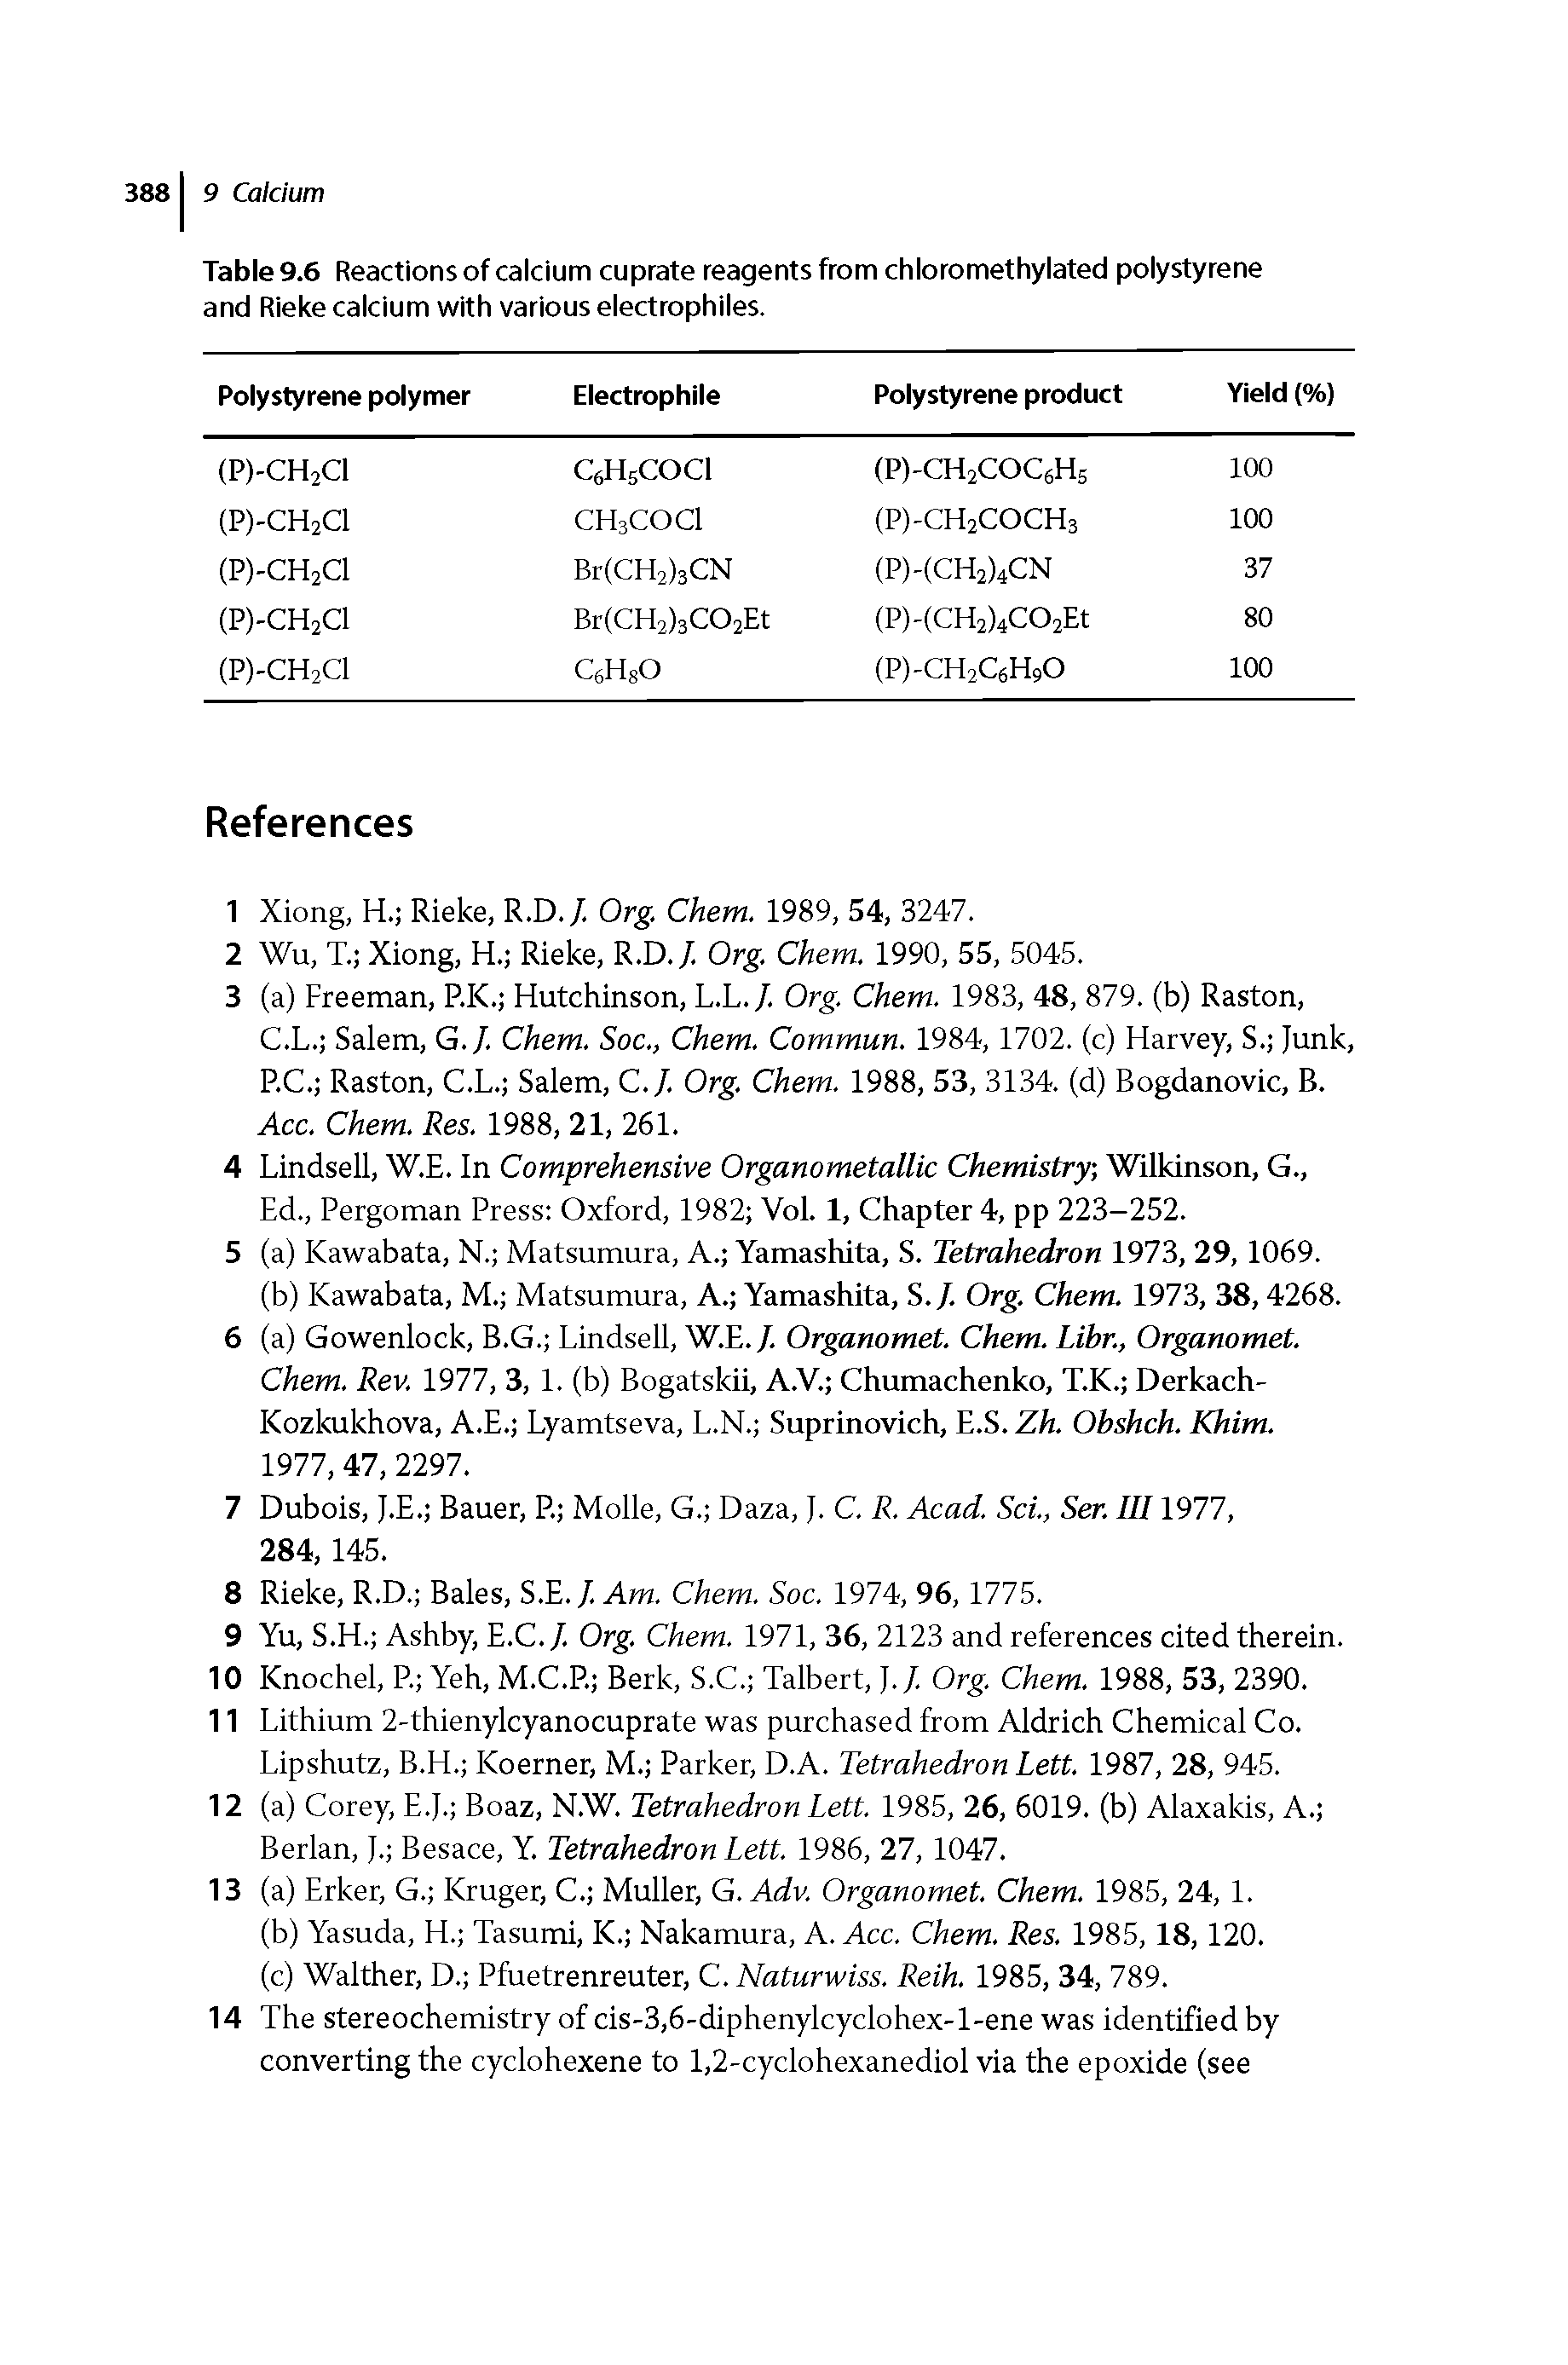 Table 9.6 Reactions of calcium cuprate reagents from chloromethylated polystyrene and Rieke calcium with various electrophiles.